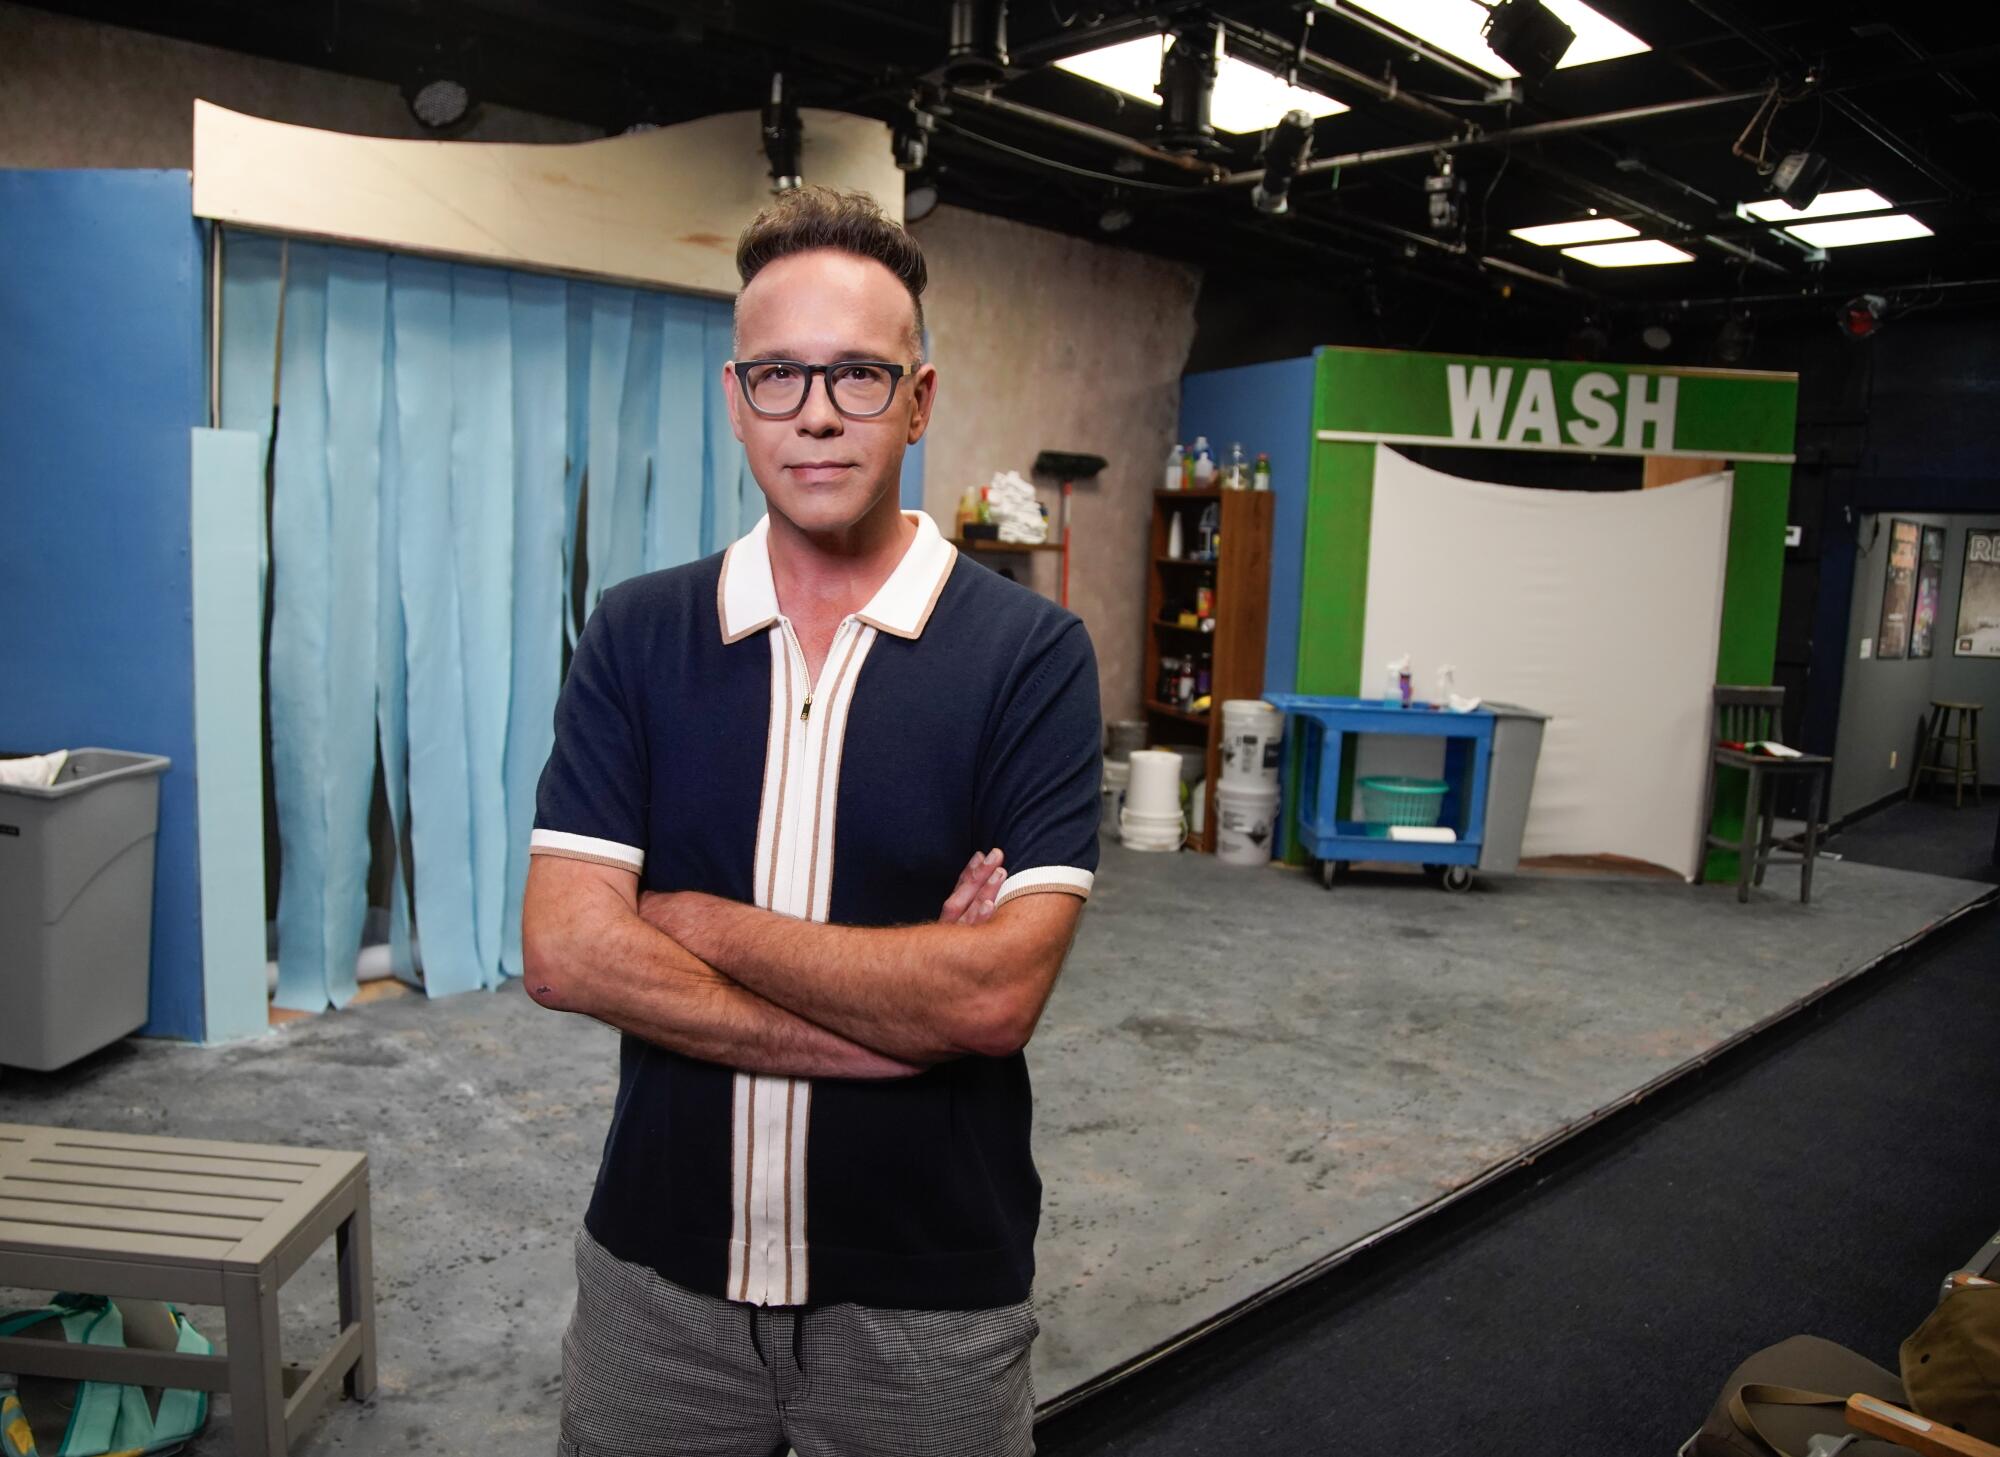 James P. Darvas is the artistic director of OnStage Playhouse in Chula Vista.  